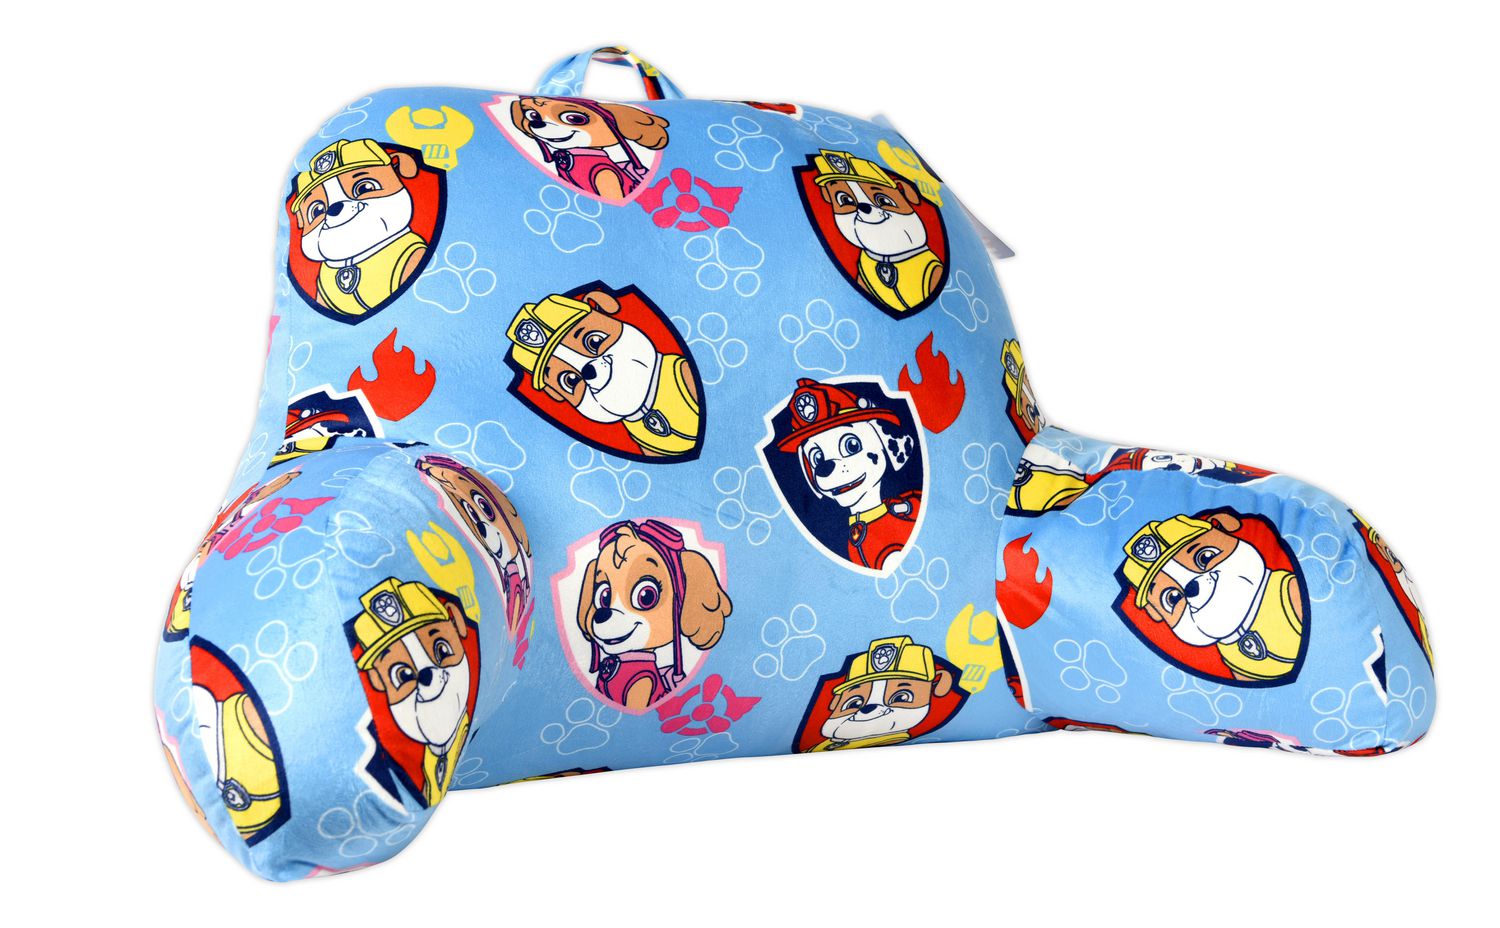 PAW Patrol Bed Rest Pillow | Walmart Canada